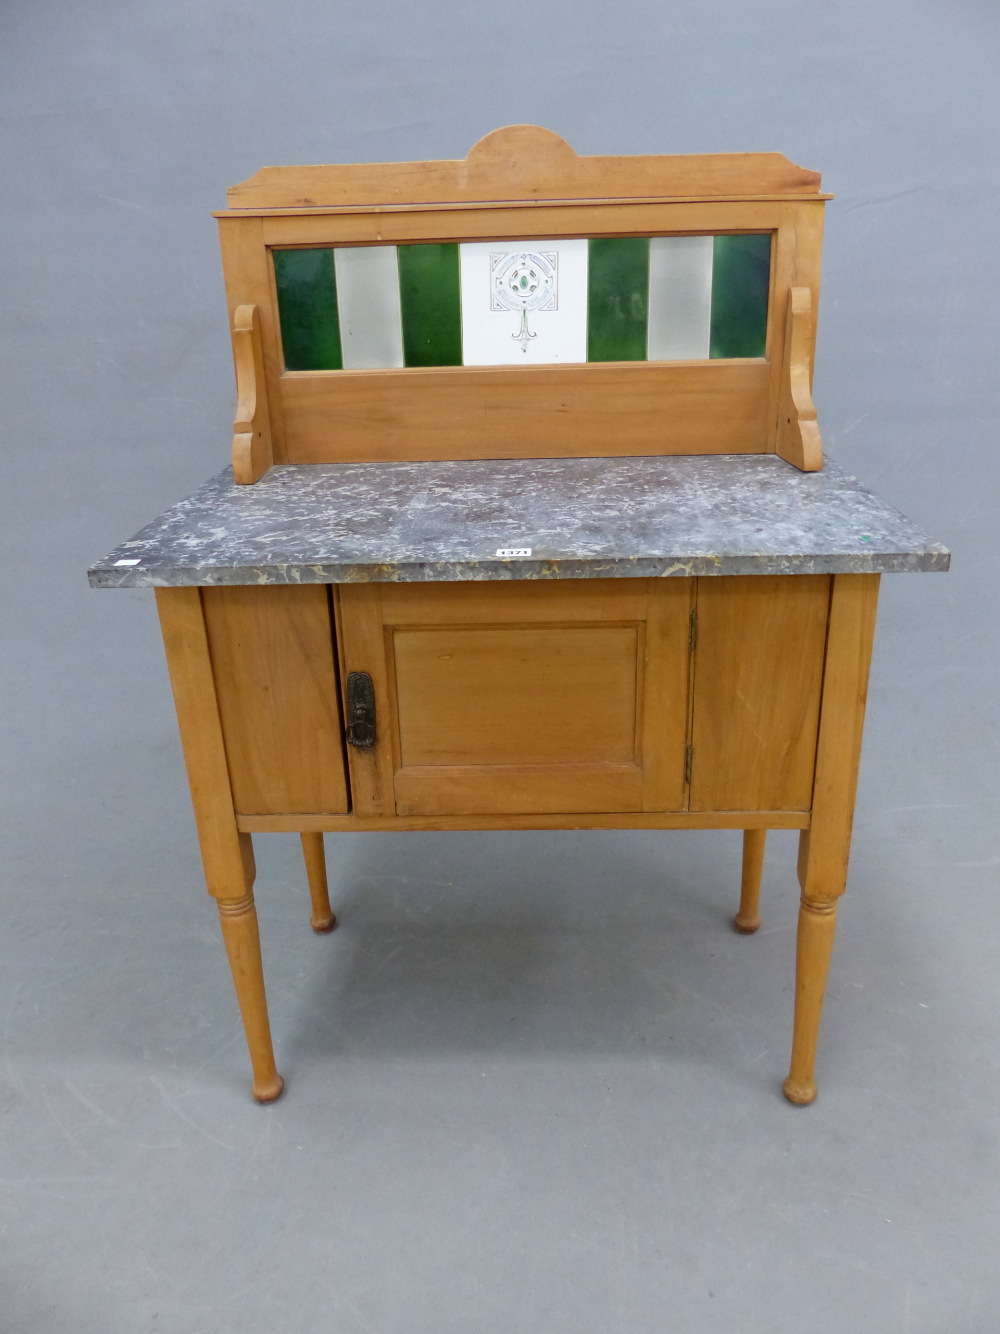 AN EDWARDIAN GREY MARBLE TOPPED PINE WASHSTAND WITH A TILED BACK ABOVE A DOOR TO THE FRONT, THE